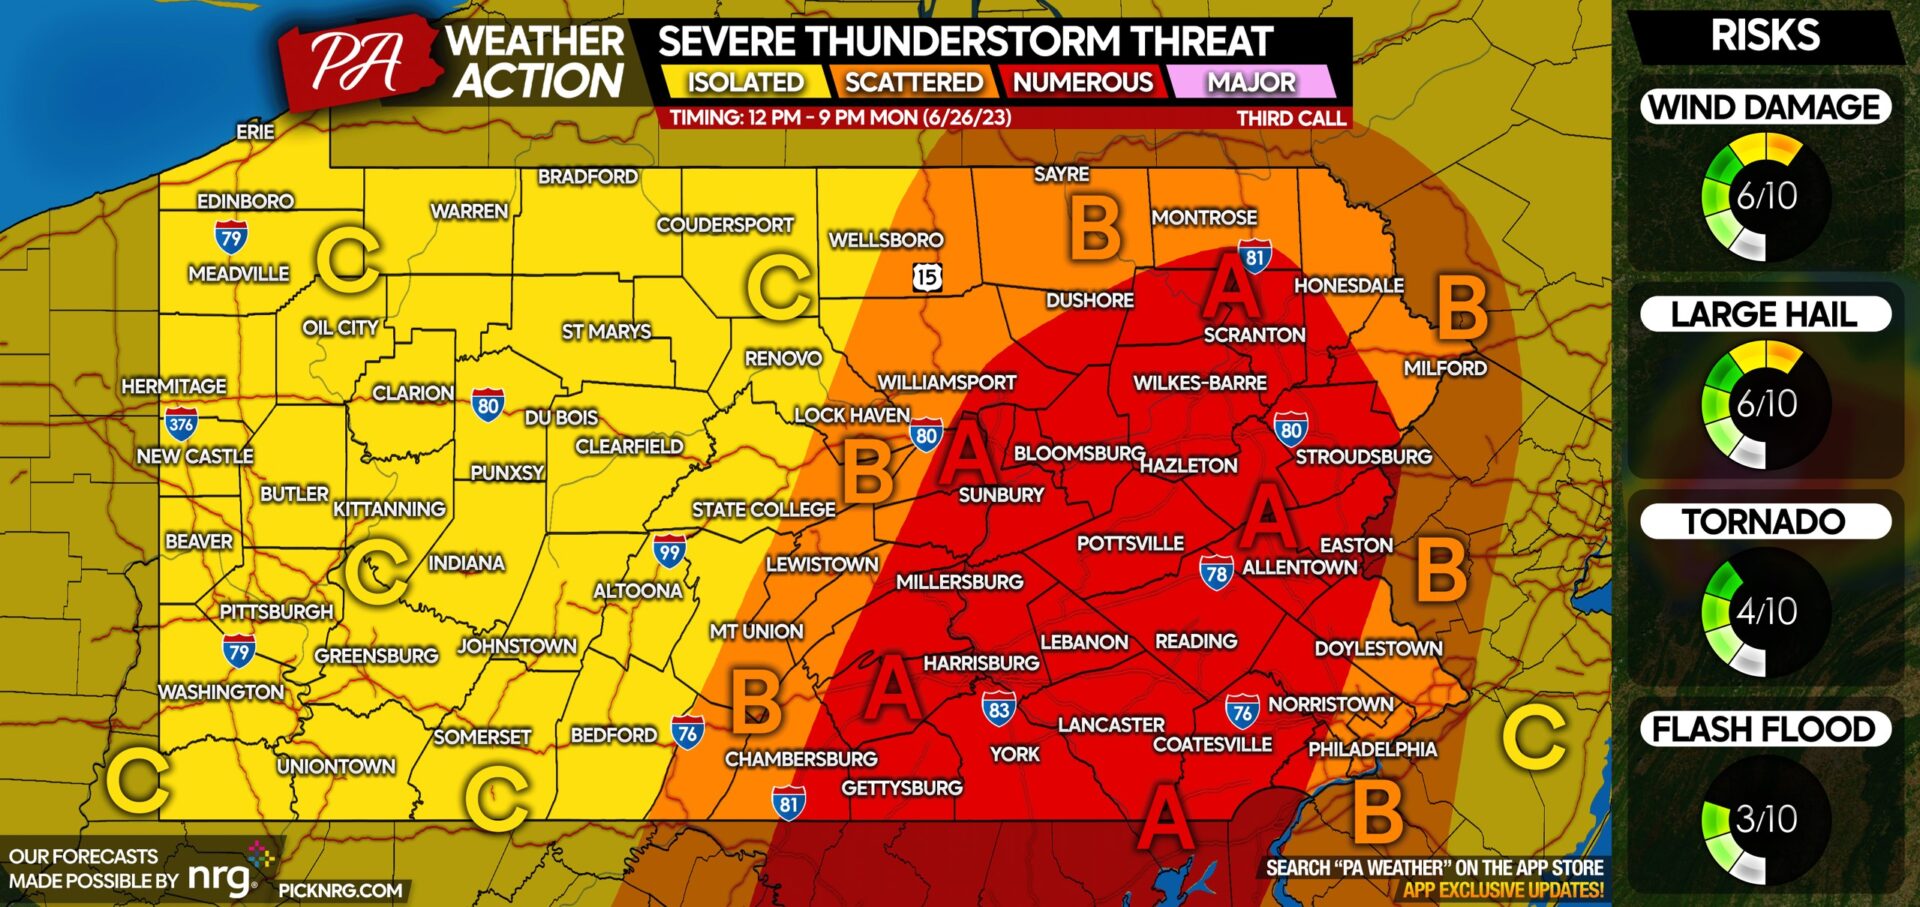 Numerous Severe Thunderstorms Possible Monday In Pennsylvania; Damaging Winds, Large Hail, Isolated Tornado Possible